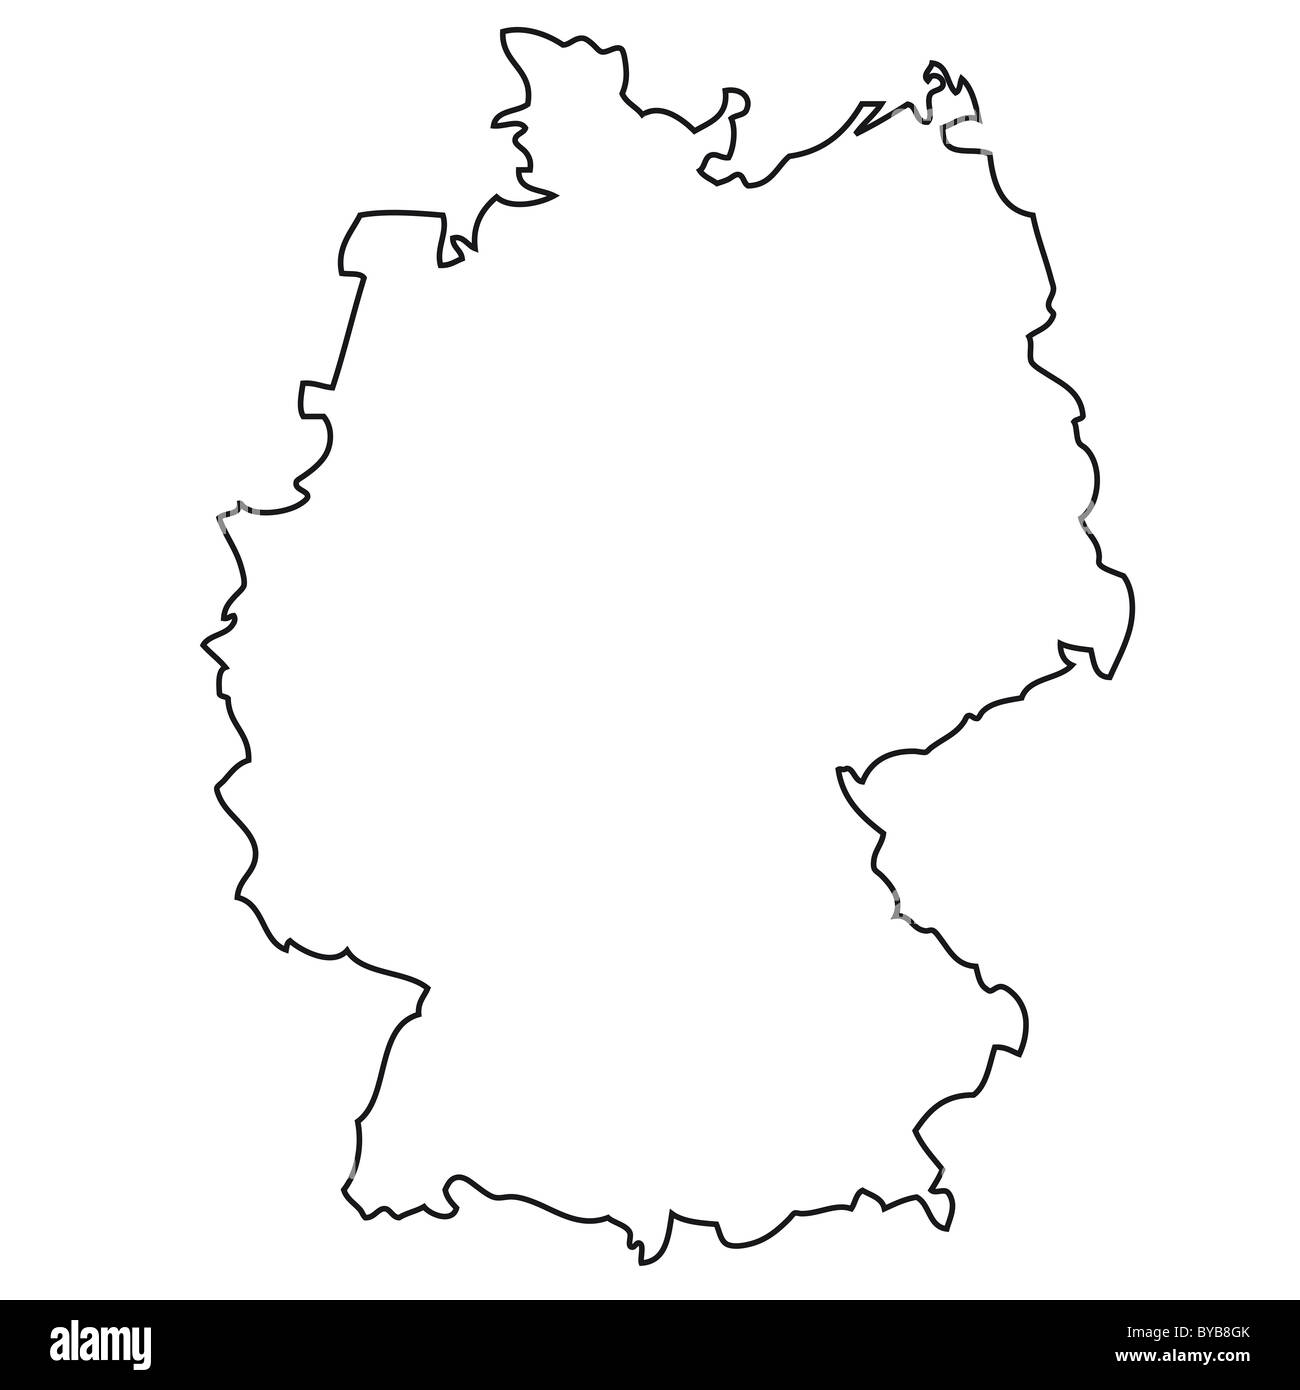 Outline, map of Germany Stock Photo